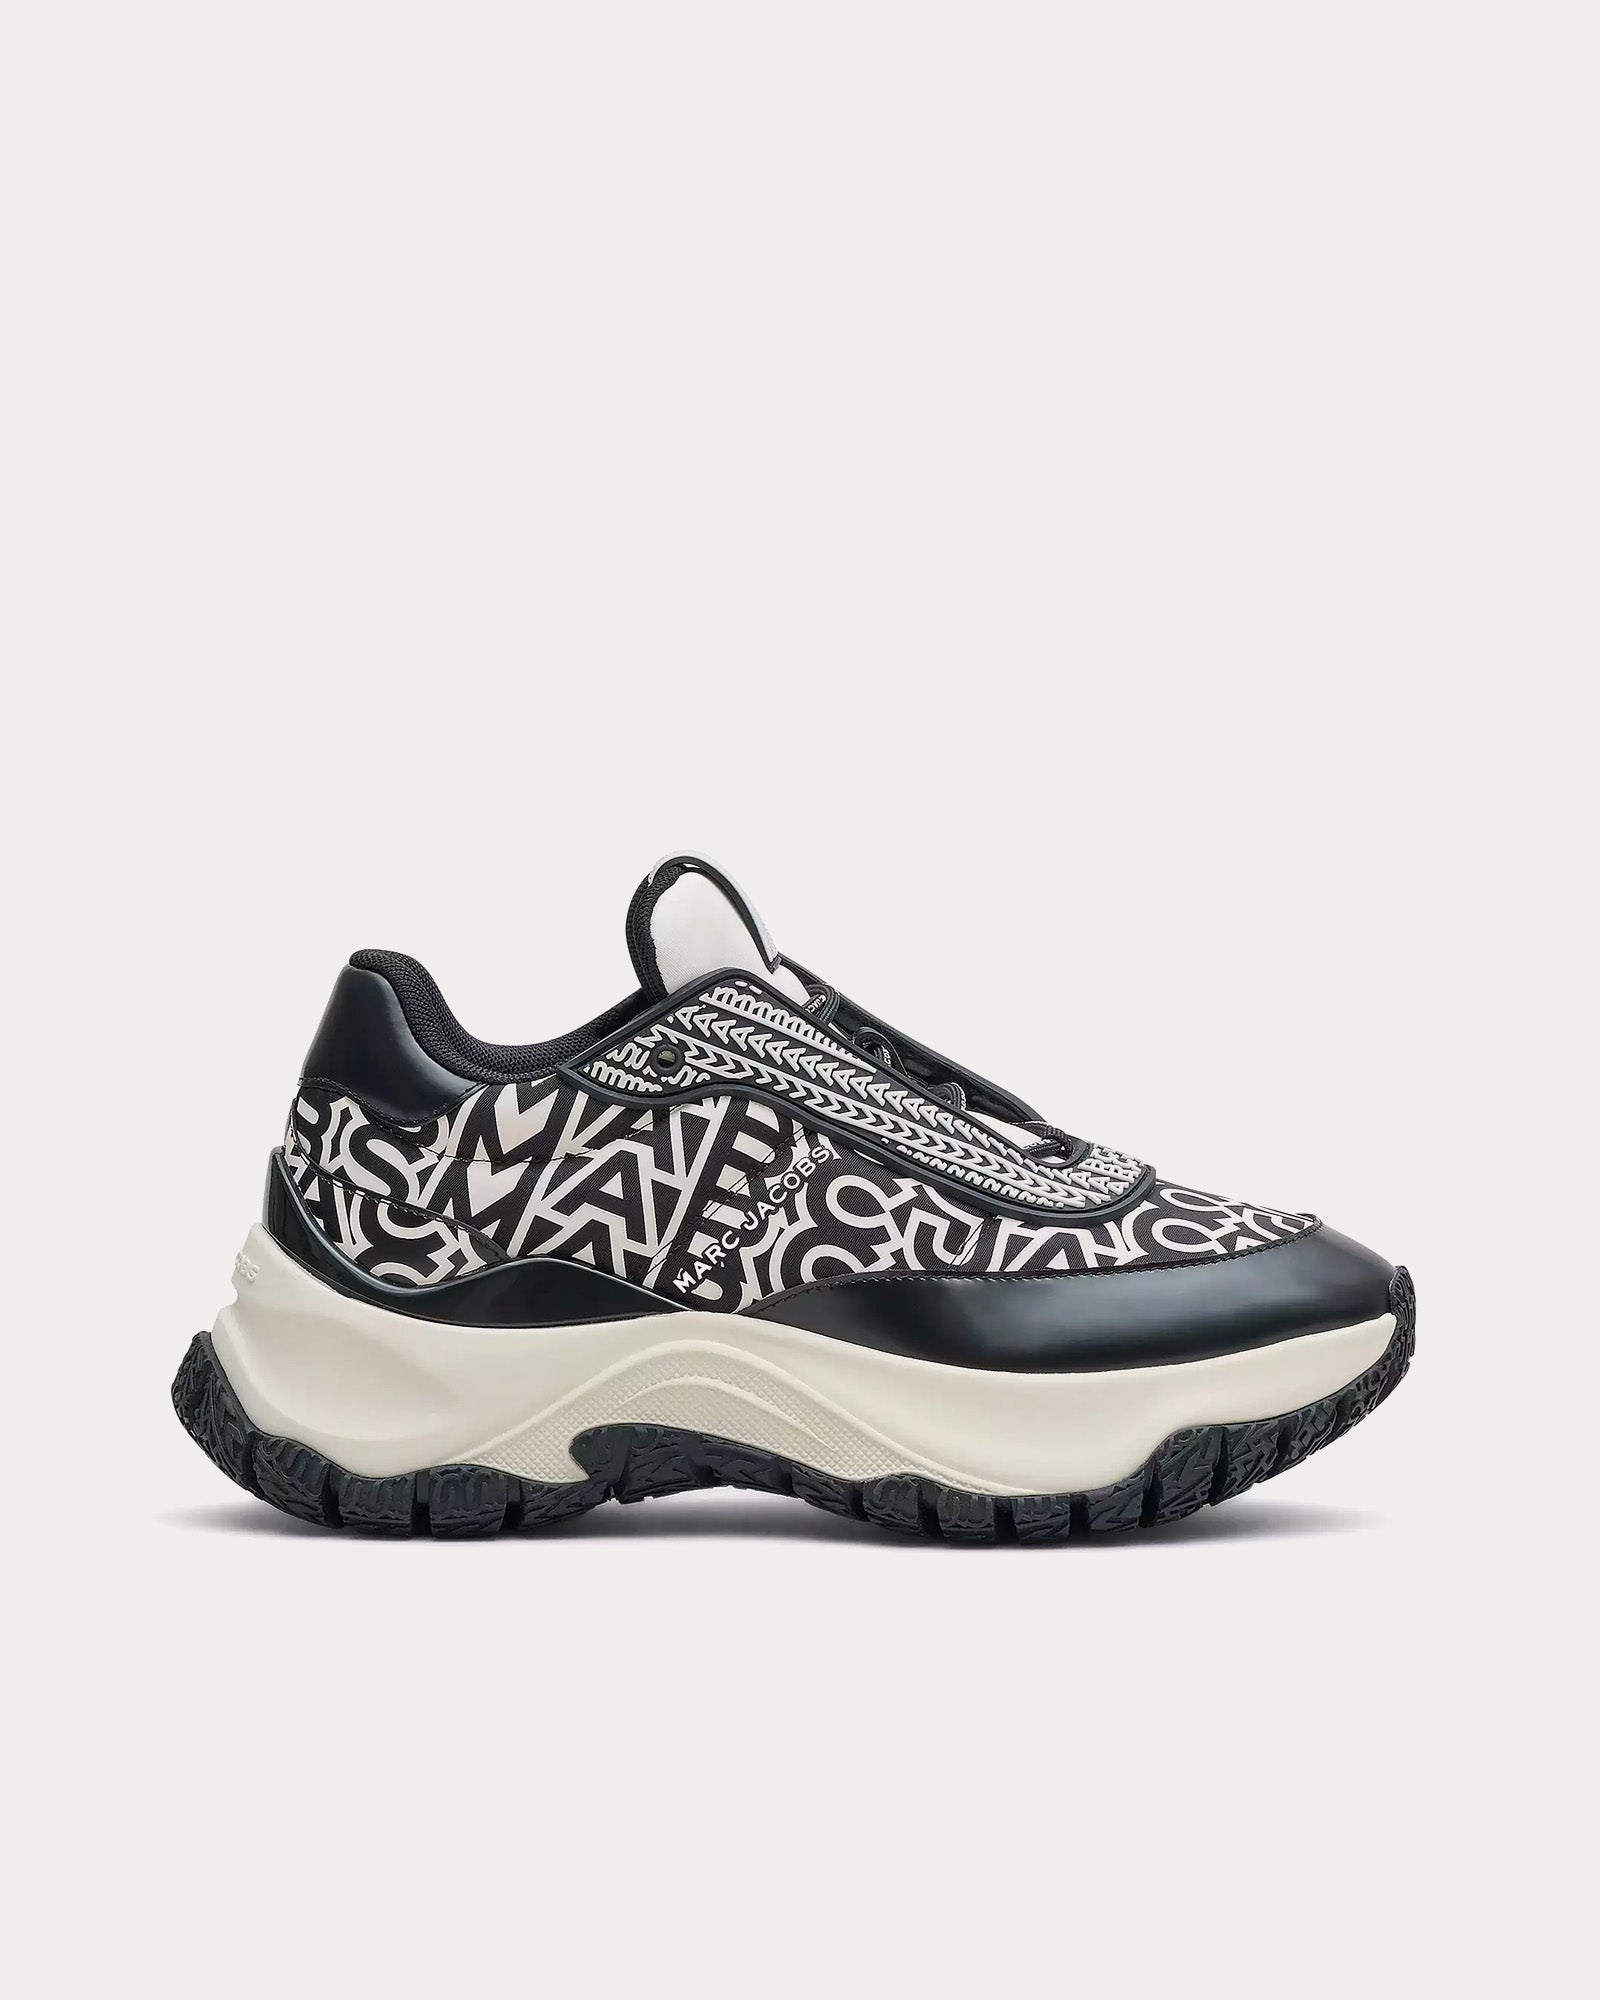 Marc Jacobs - The Monogram Lazy Runner Black / White Low Top Sneakers